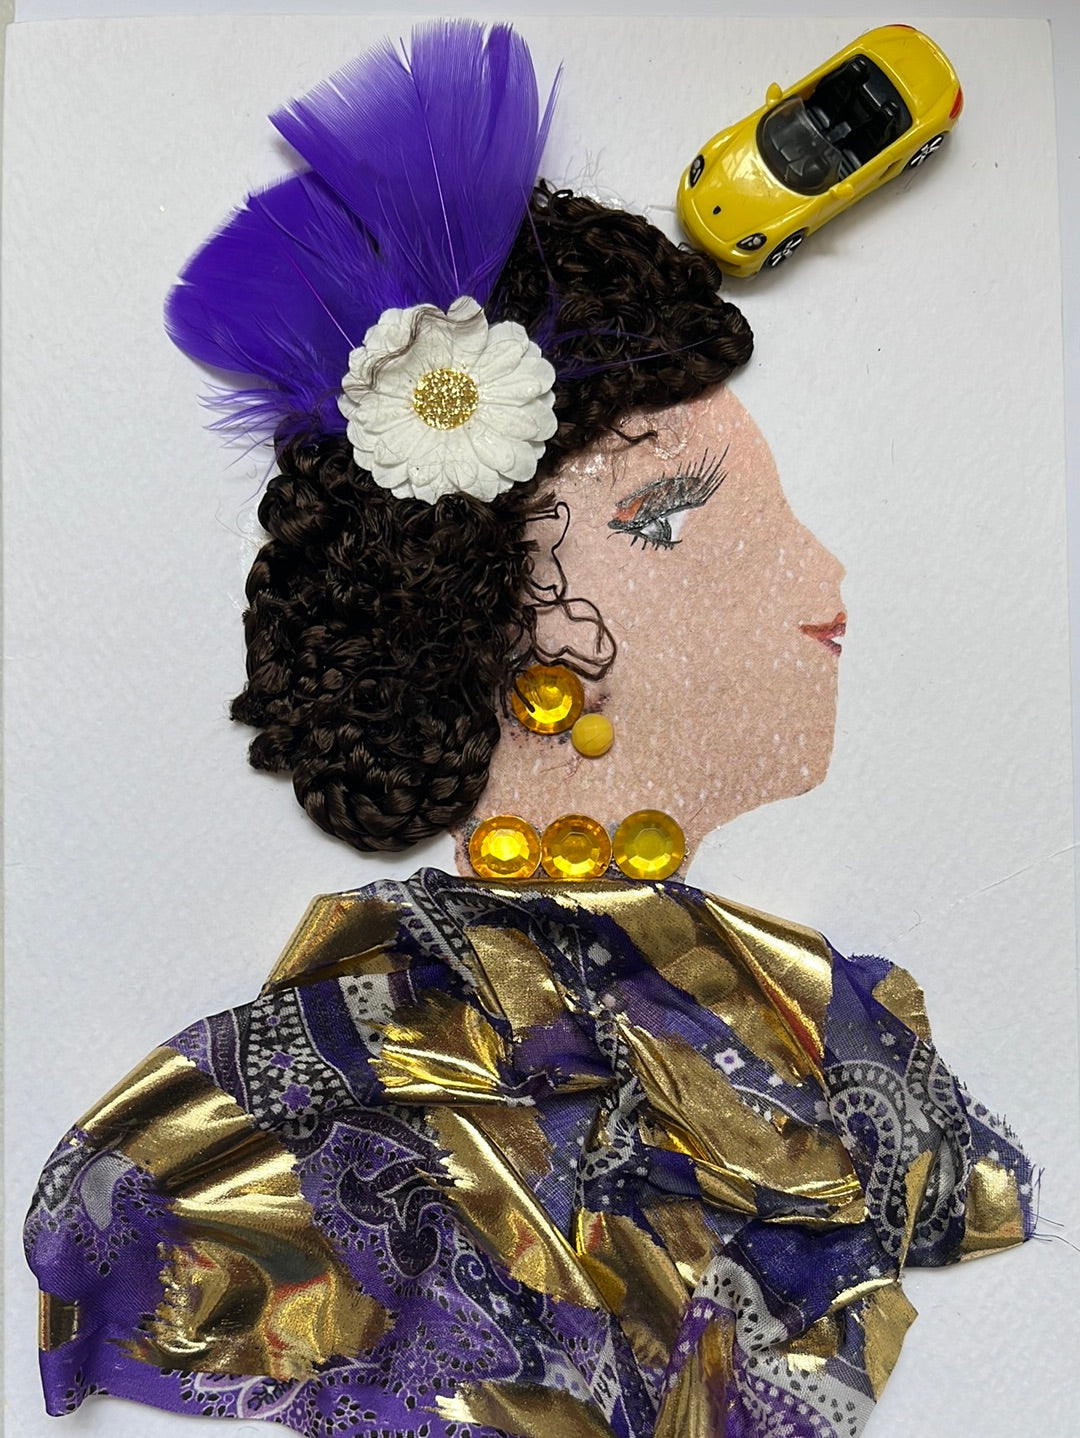 This card was given the name Halima. Halima's blouse is made up of a purple backgrounf with gold paisley accents,  and large gold stripes running through the entire top. She wears a yellow gem necklace and matching earrings. Her hair is deep brown, and has a white flower in it that has a sparkly gold center. Behind the flower there are two purple feathers. In the top right corner, there is a small toy sports car which is light yellow. 